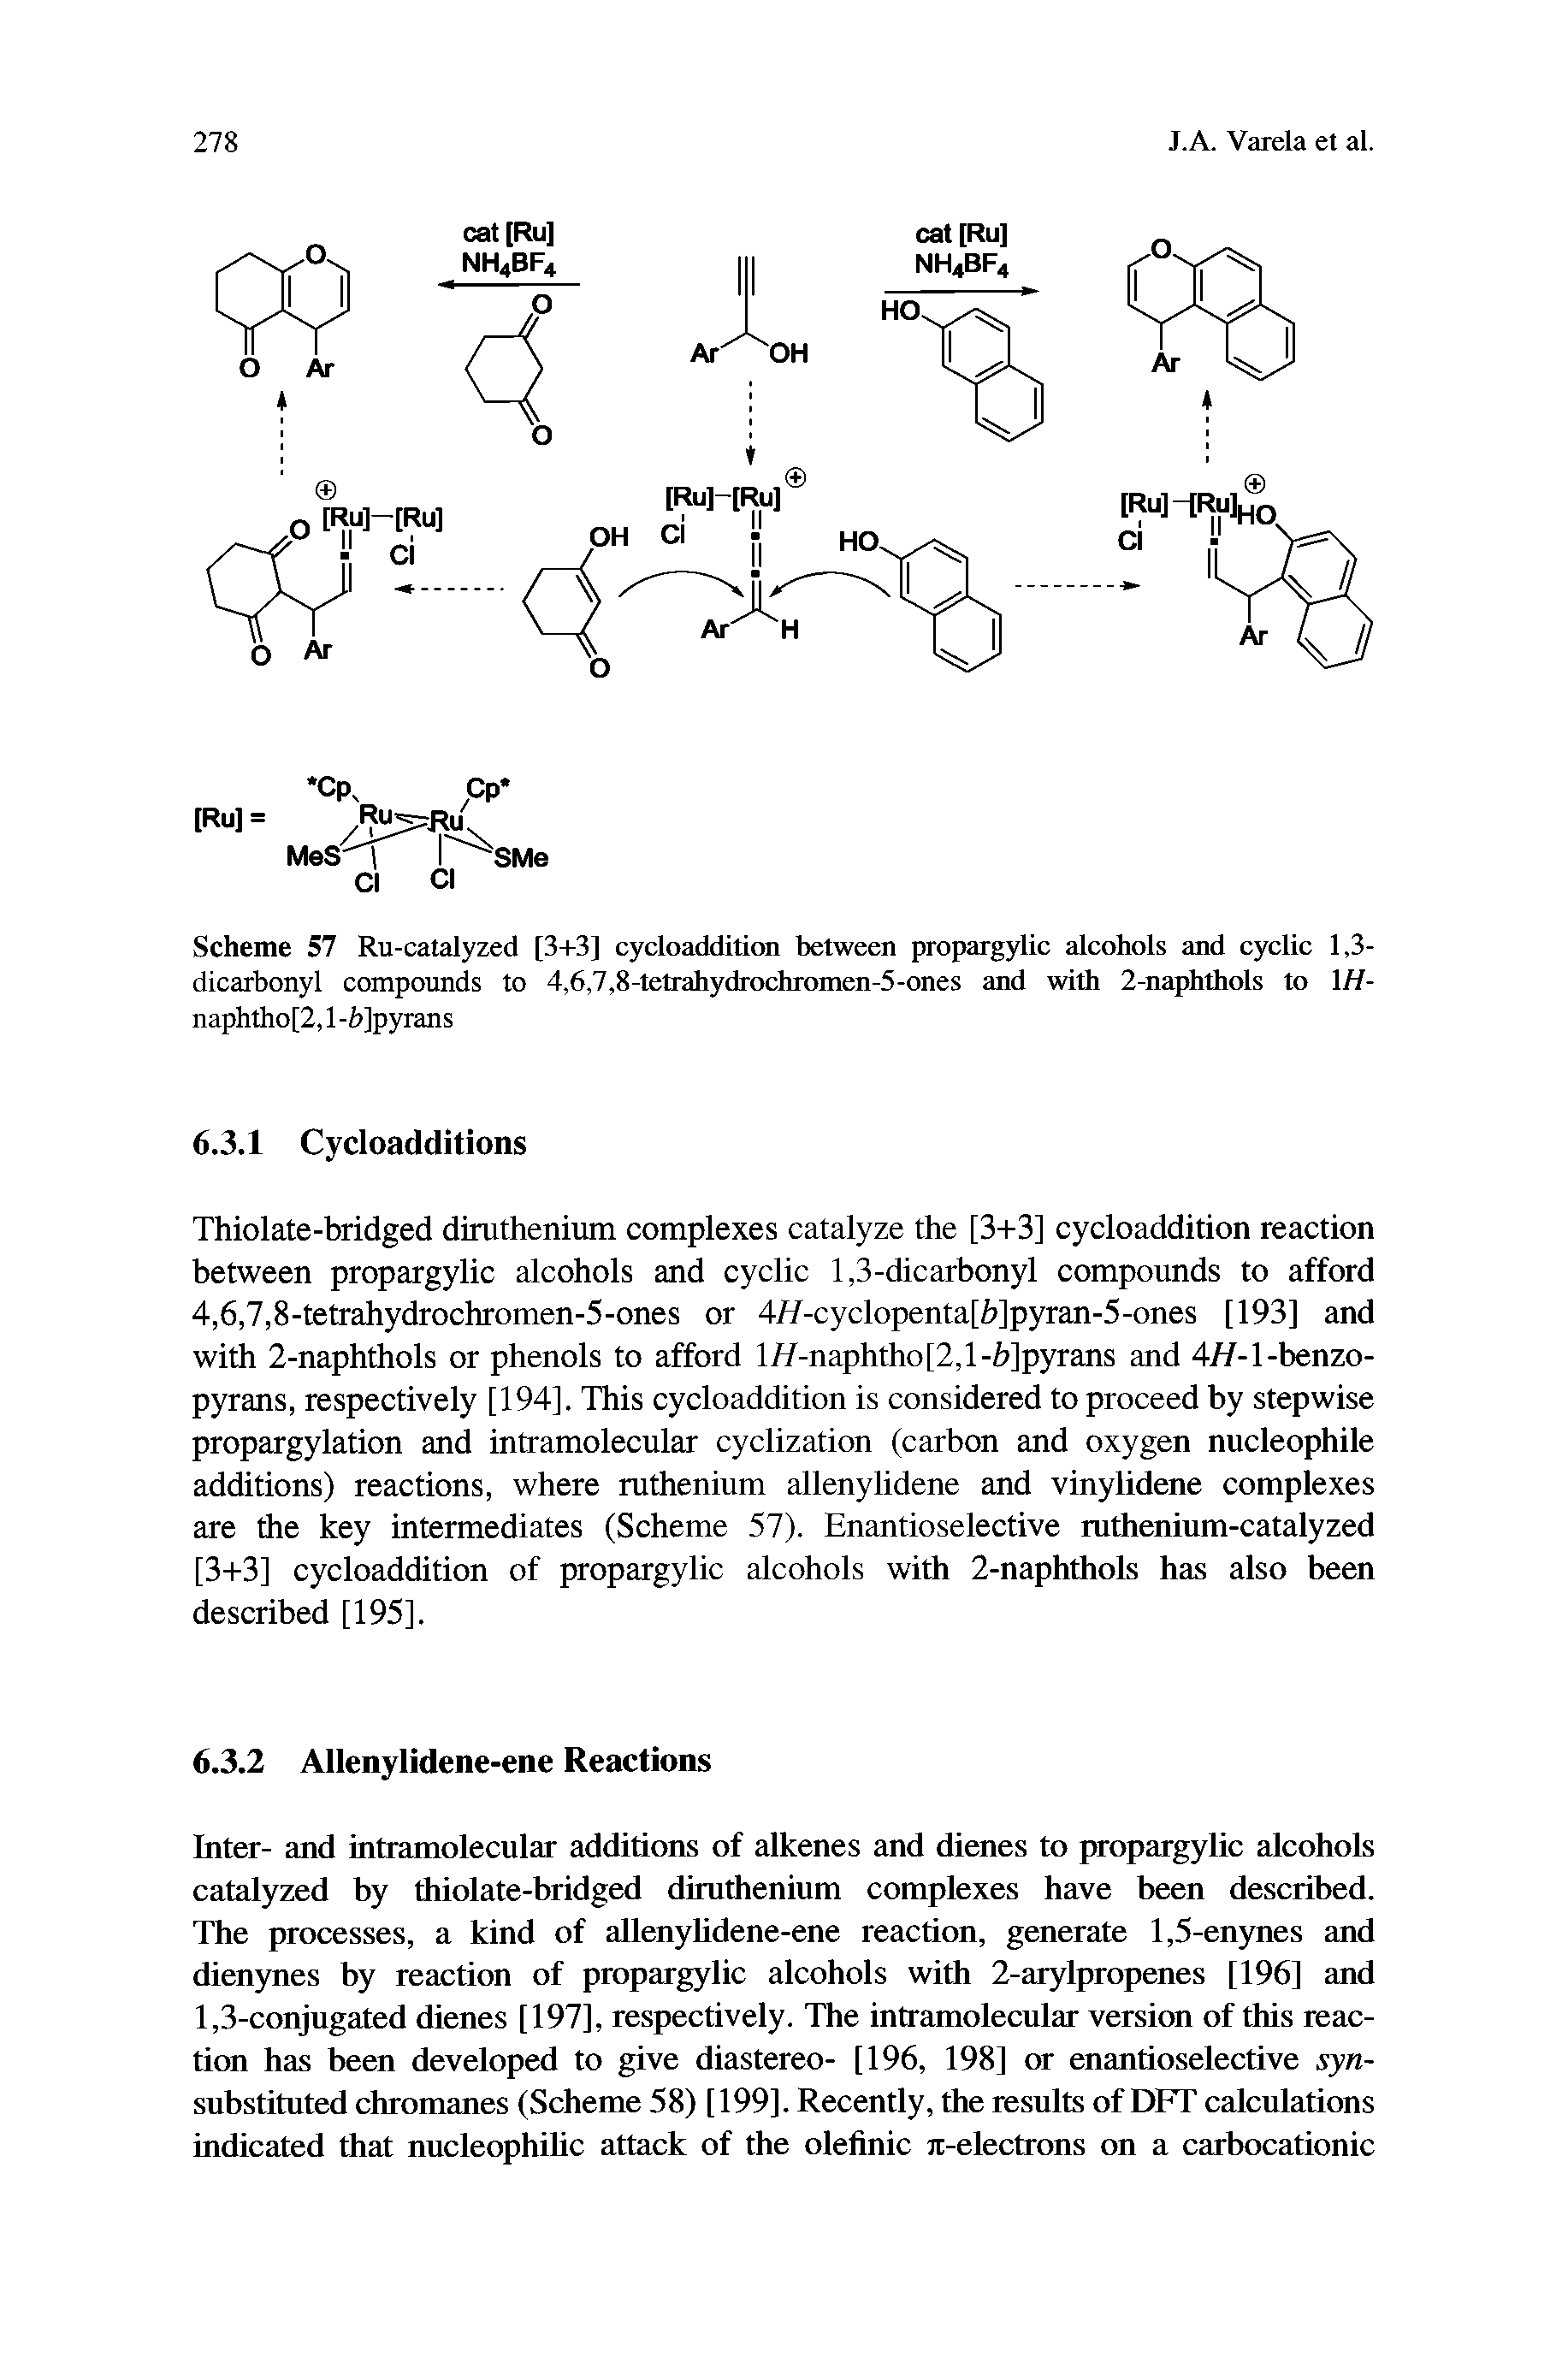 Scheme 57 Ru-catalyzed [3+3] cycloaddition between propargylic alcohols and cyclic 1,3-dicarbonyl compounds to 4,6,7,8-tetrahydrochromen-5-ones and with 2-naphthols to IH-naphtho[2,1-bjpyrans...